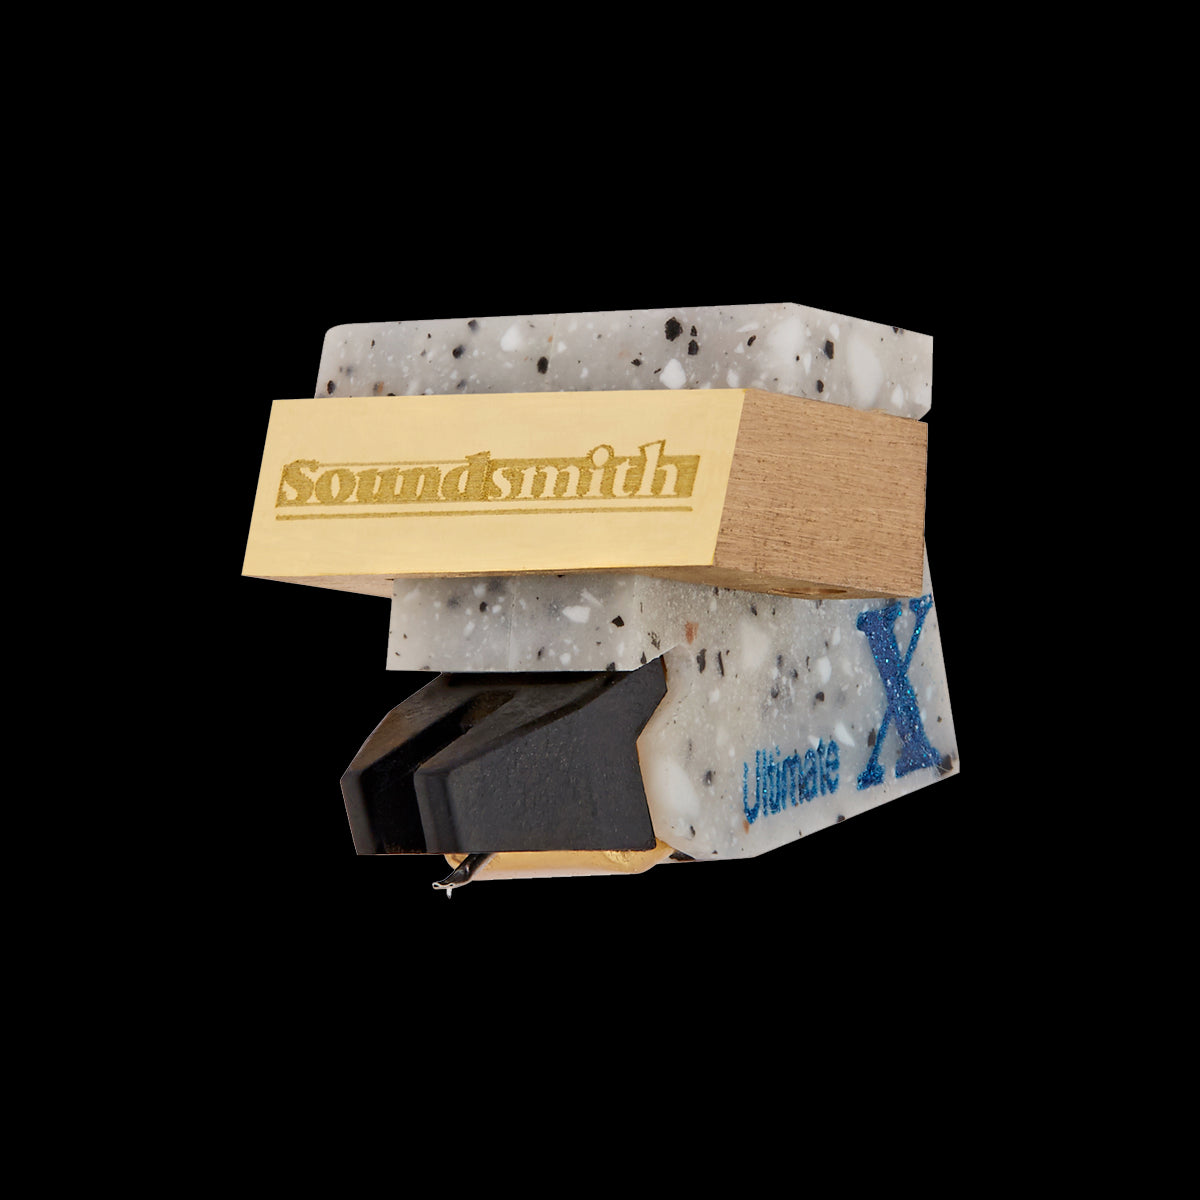 Soundsmith IROX ULTIMATE Cartridge - The Audio Experts